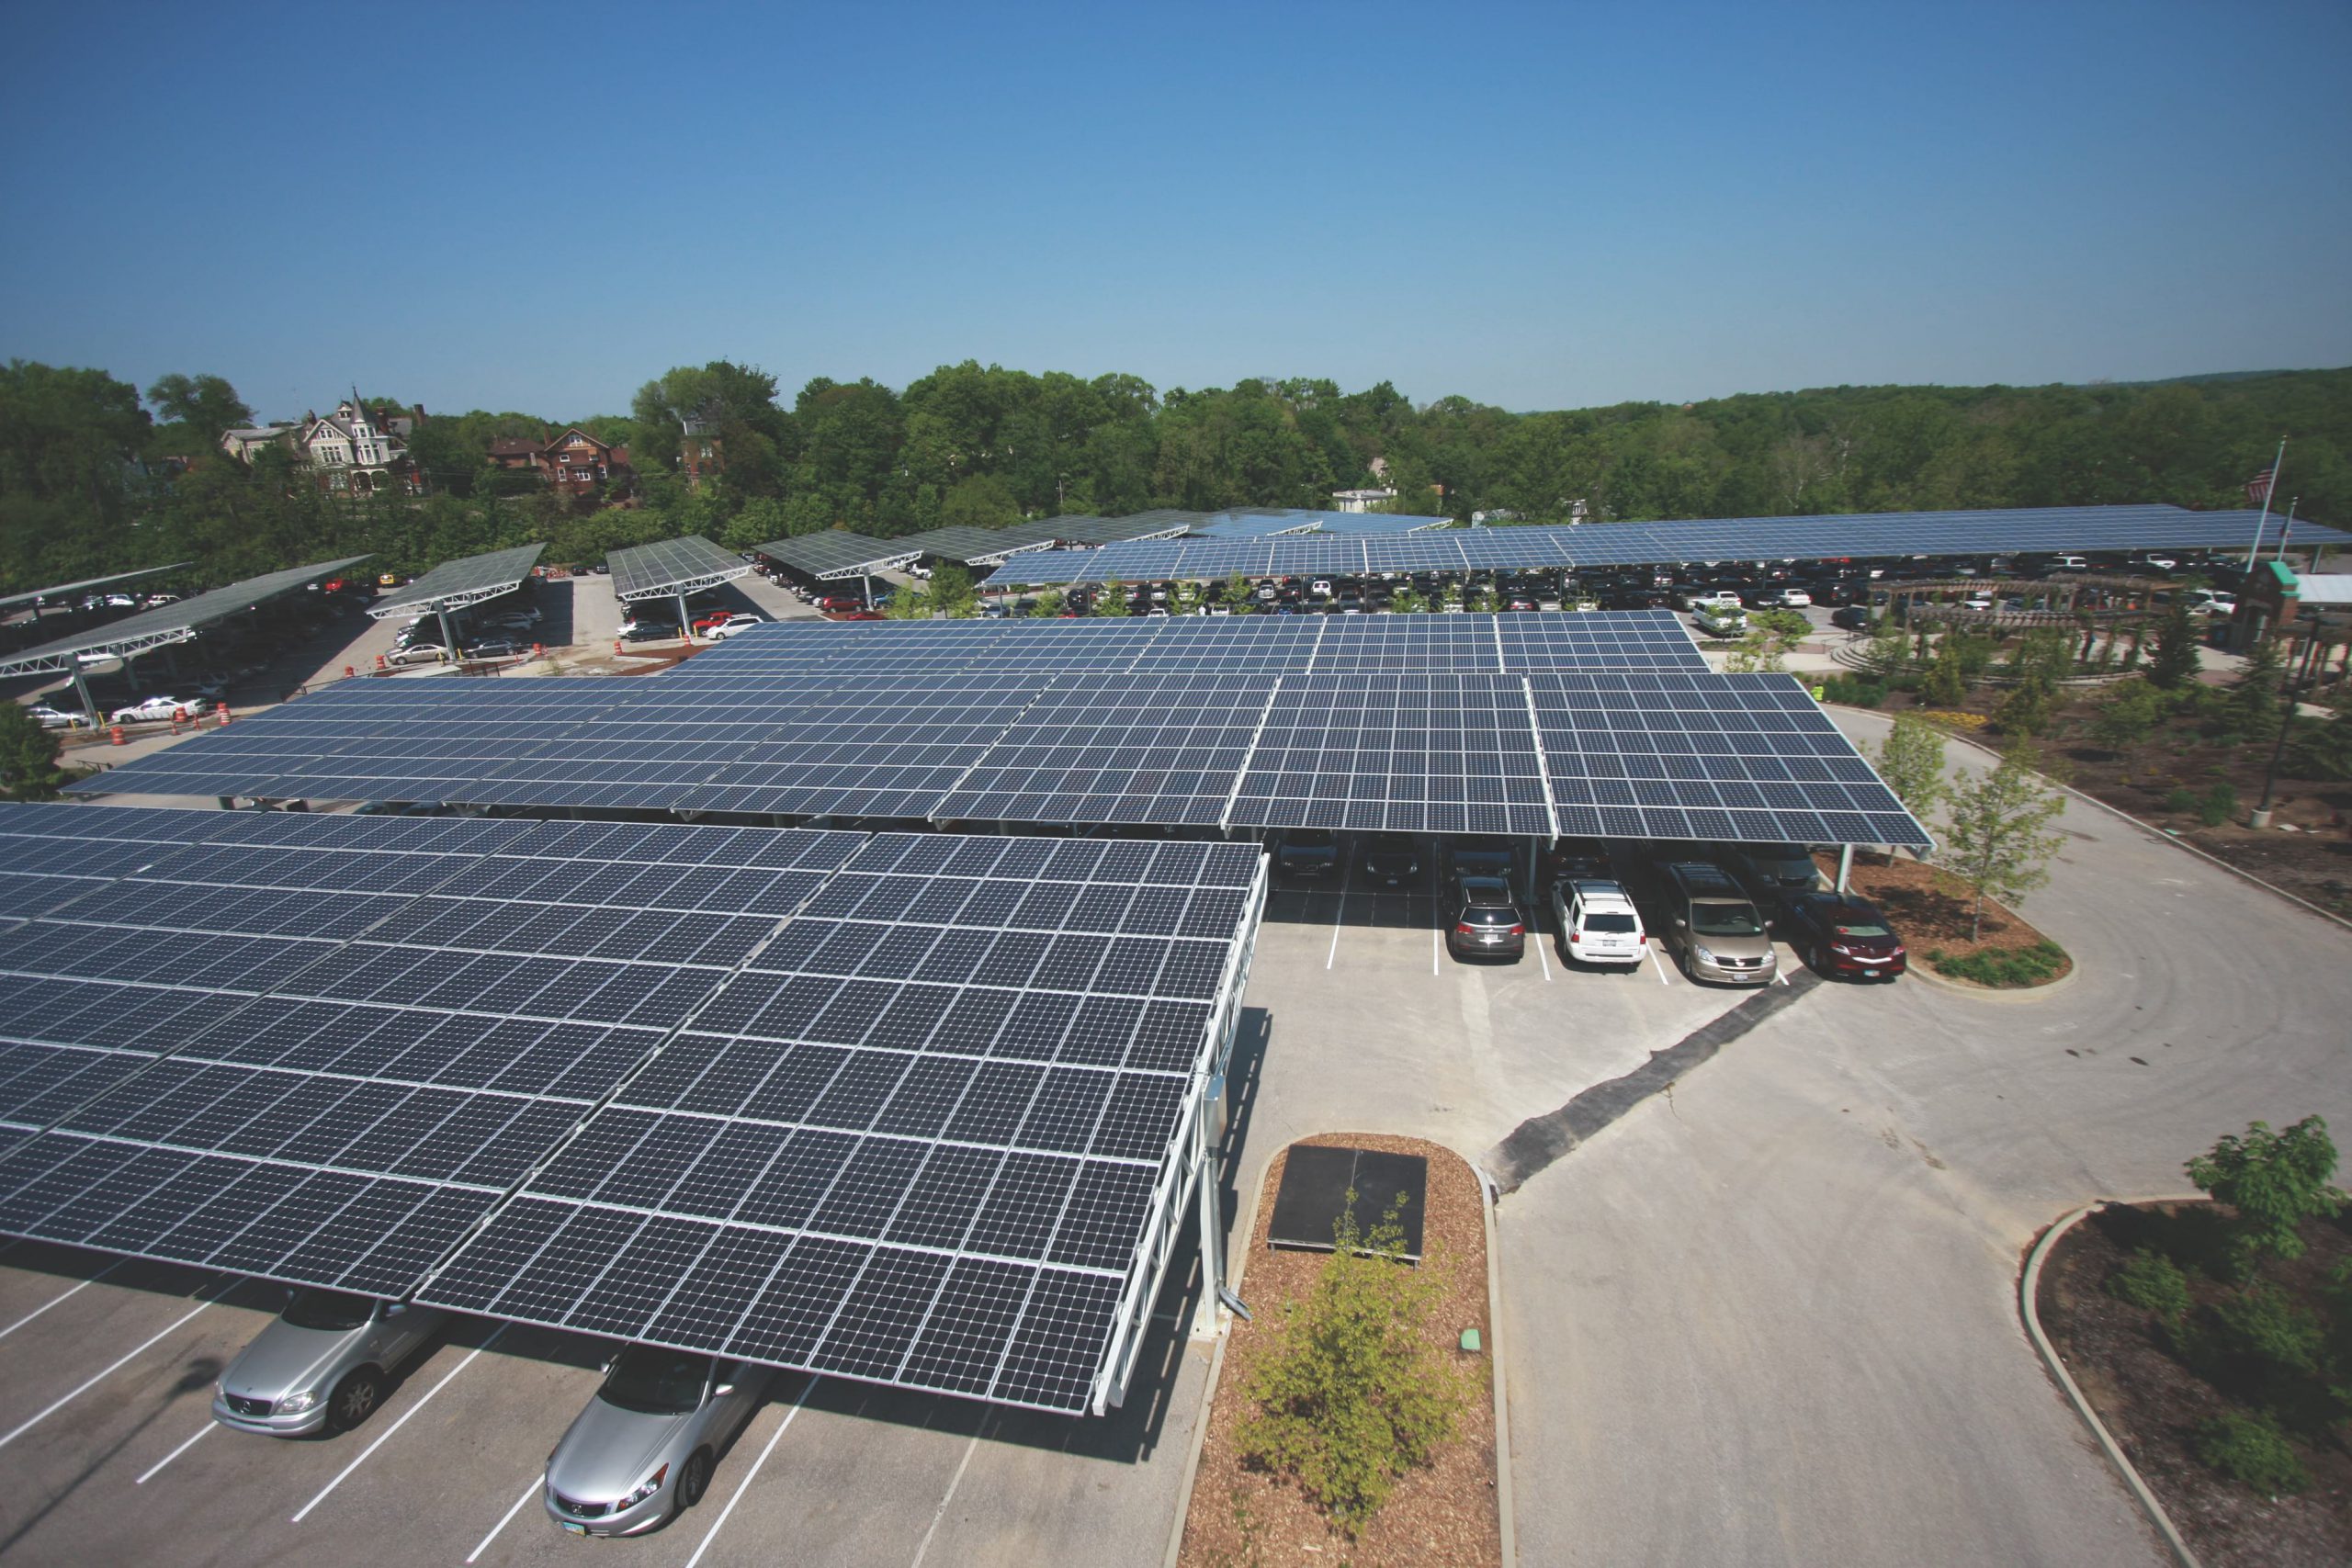 solar panels installed on car parking structures on a sunny day